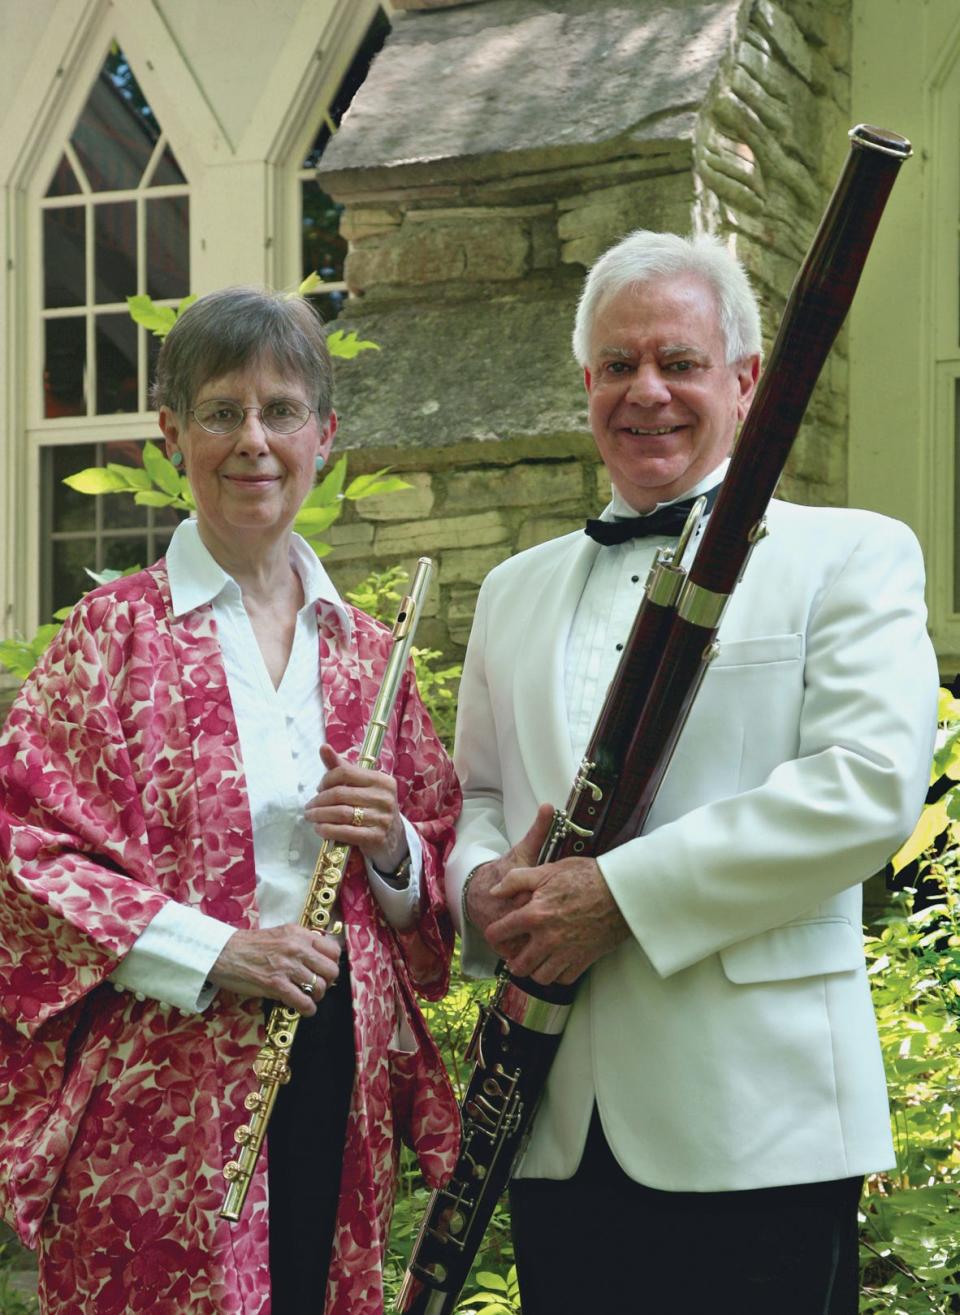 Jean Berkenstock, left, co-founded Door County chamber music festival Midsummer's Music with her husband, Jim, in 1991 and was a renowned flute player with Midsummer's and several Chicago orchestras. Jean Berkenstock died Oct. 3 at age 89 and a memorial service is set for Dec. 1 in Sister Bay.